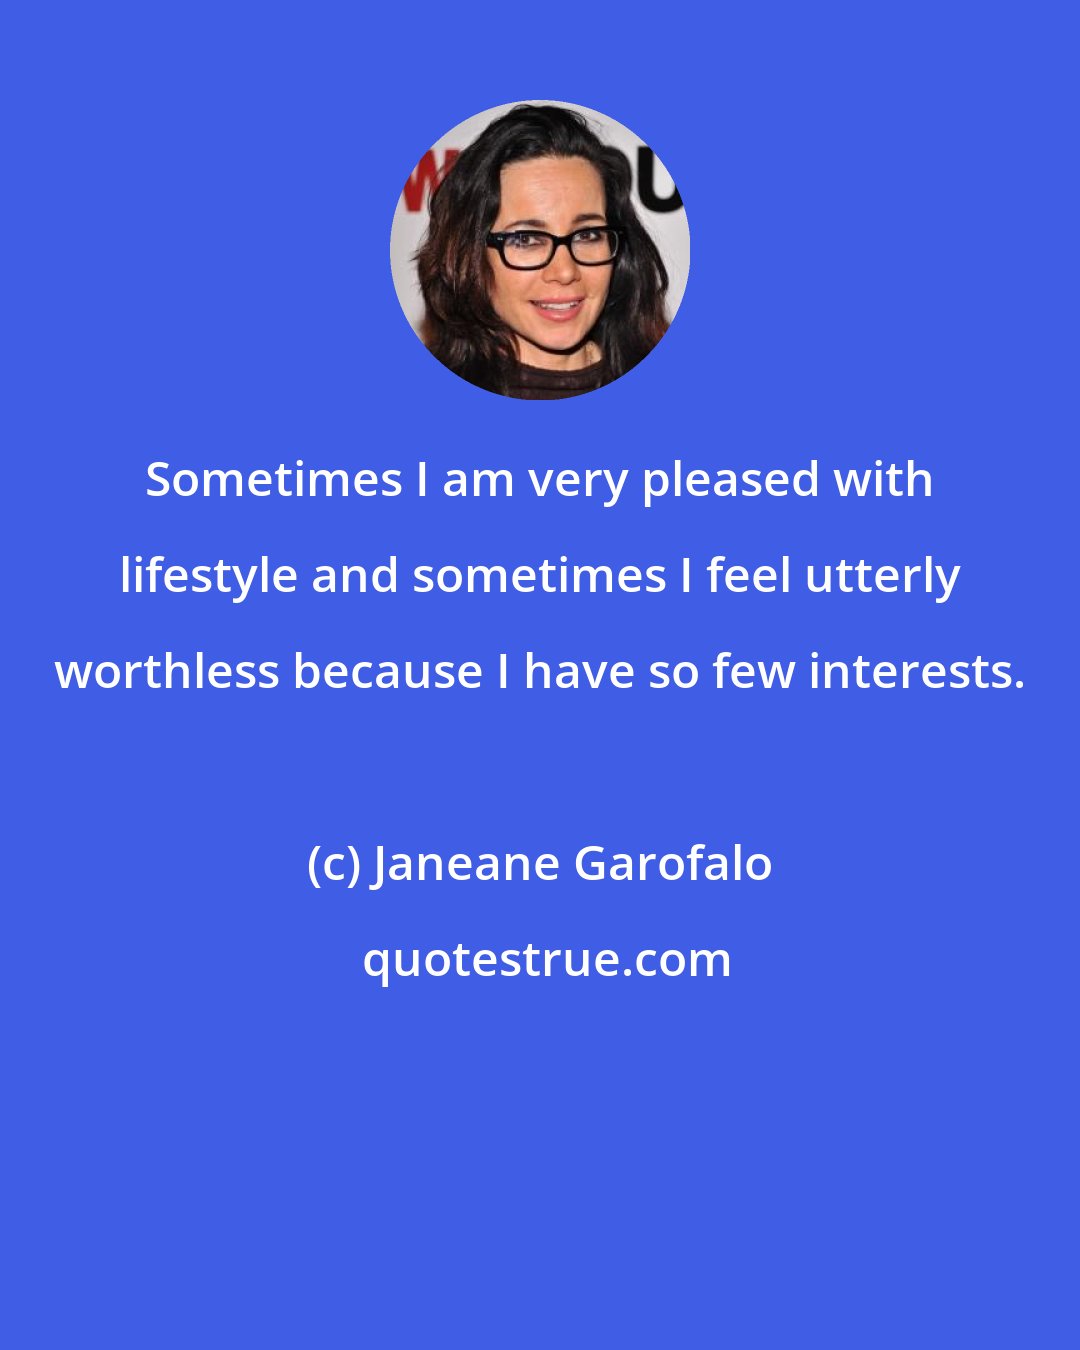 Janeane Garofalo: Sometimes I am very pleased with lifestyle and sometimes I feel utterly worthless because I have so few interests.